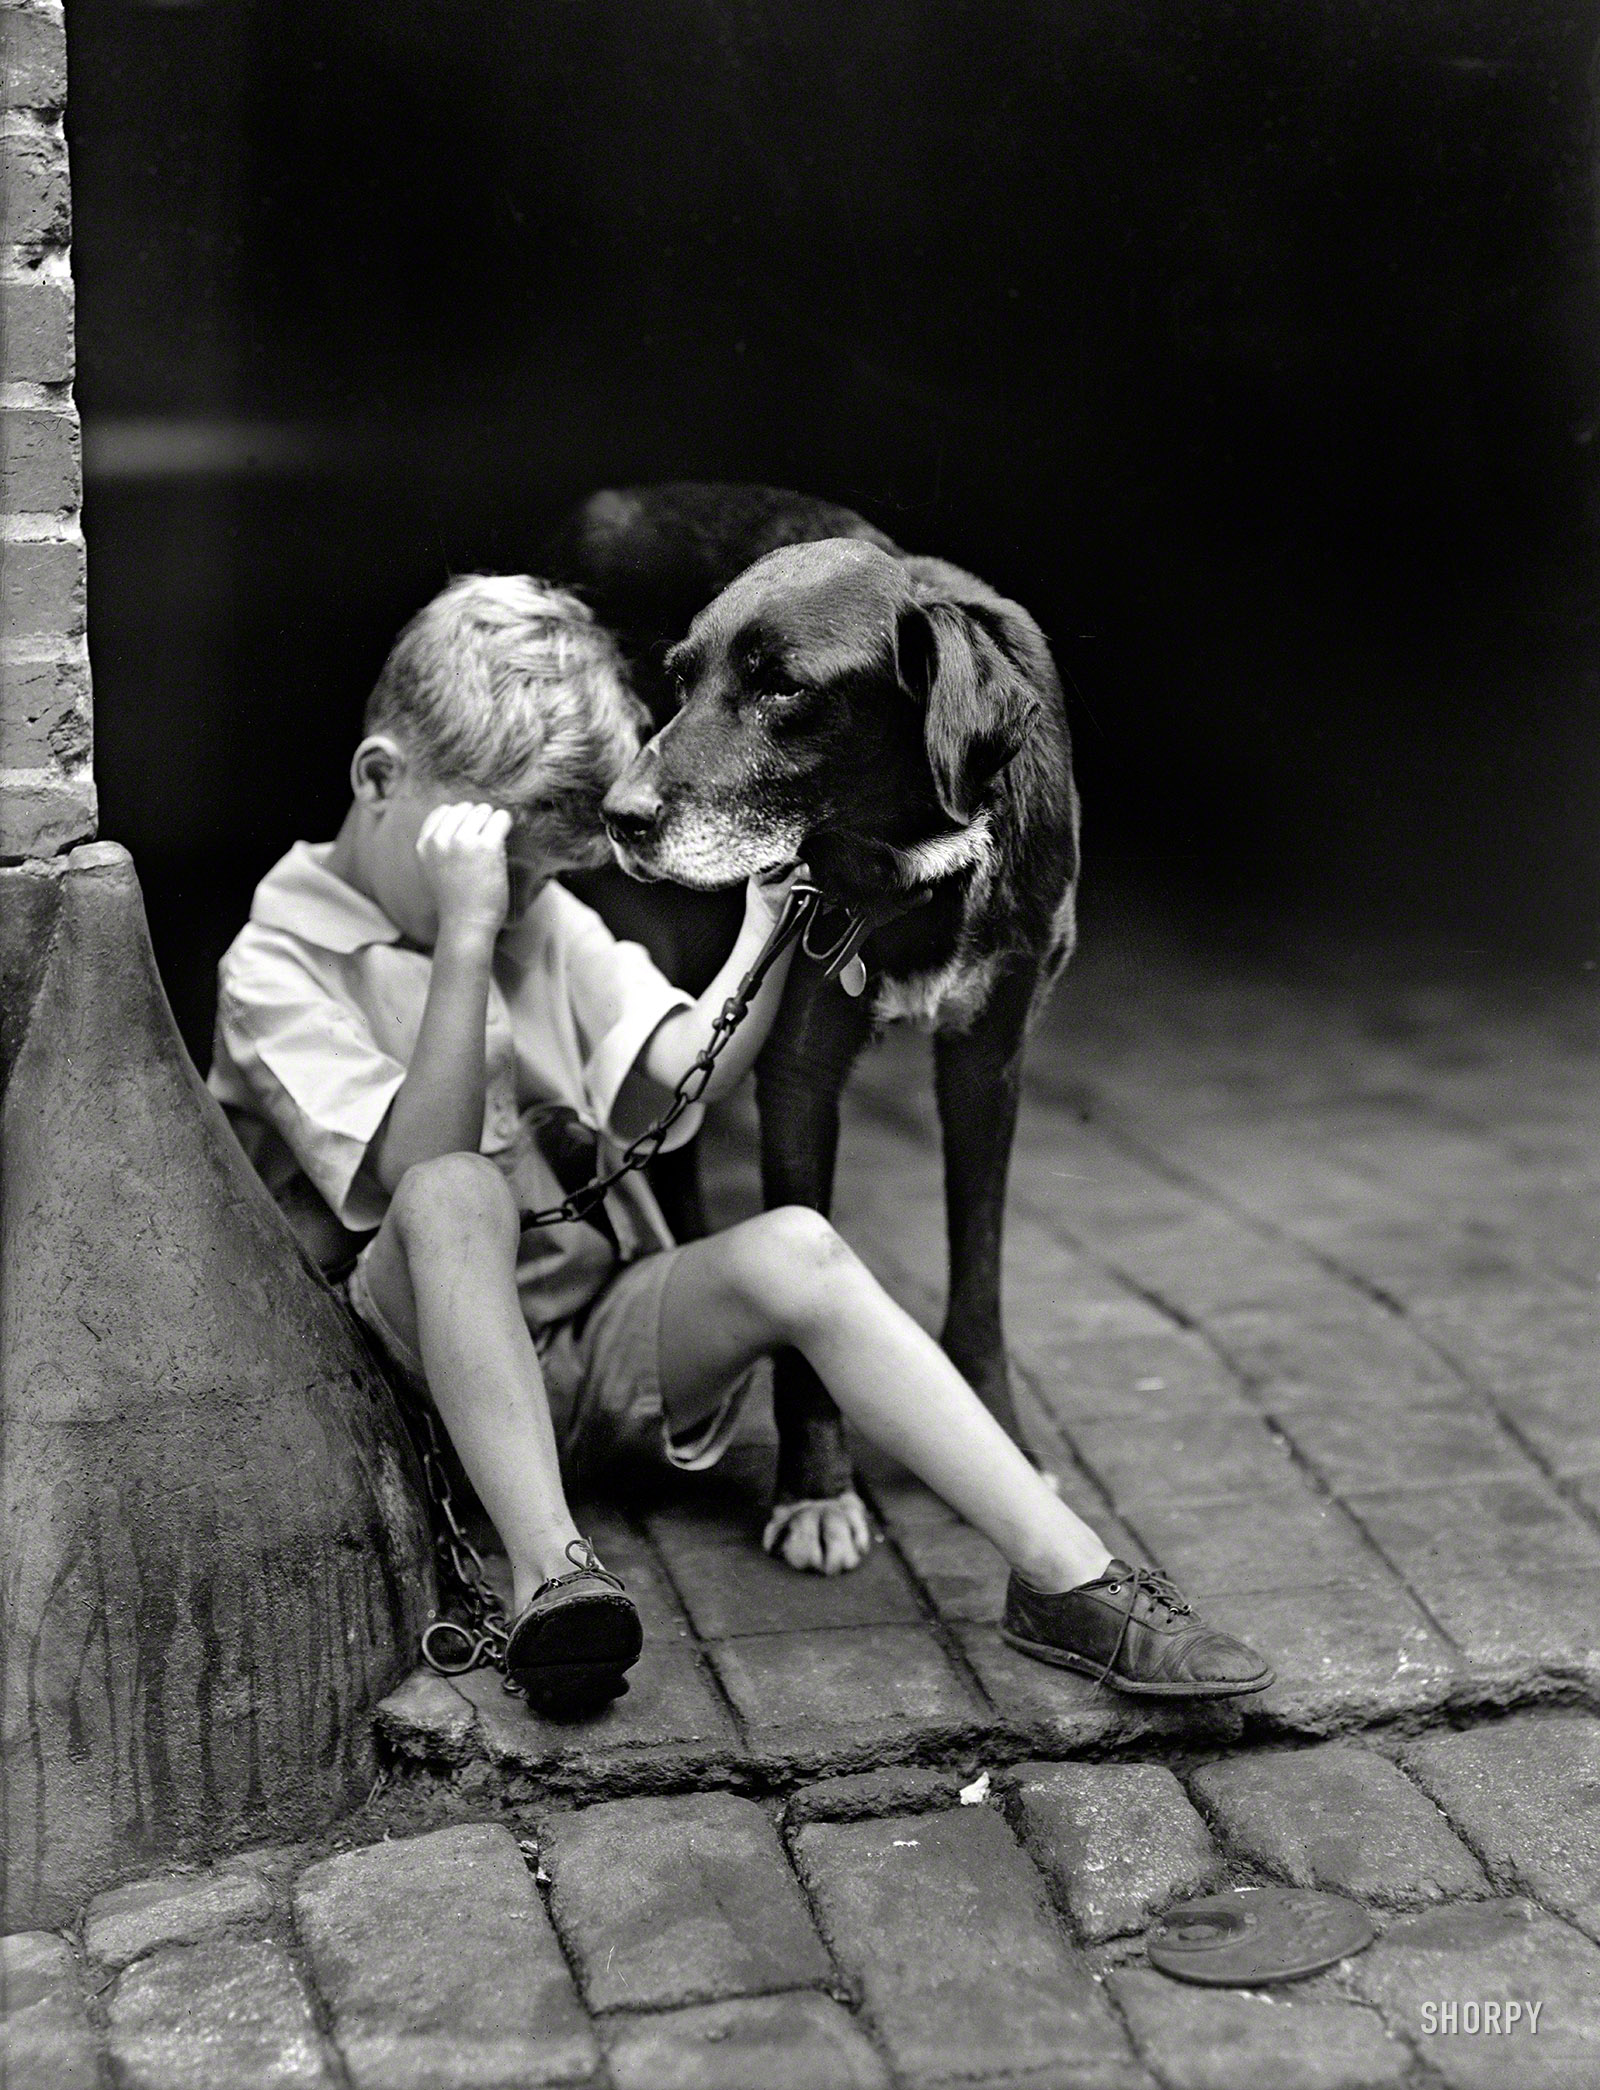 Washington, D.C., circa 1922. "Boy and dog." Feel free to construct your own narrative. Harris & Ewing Collection glass negative. View full size.